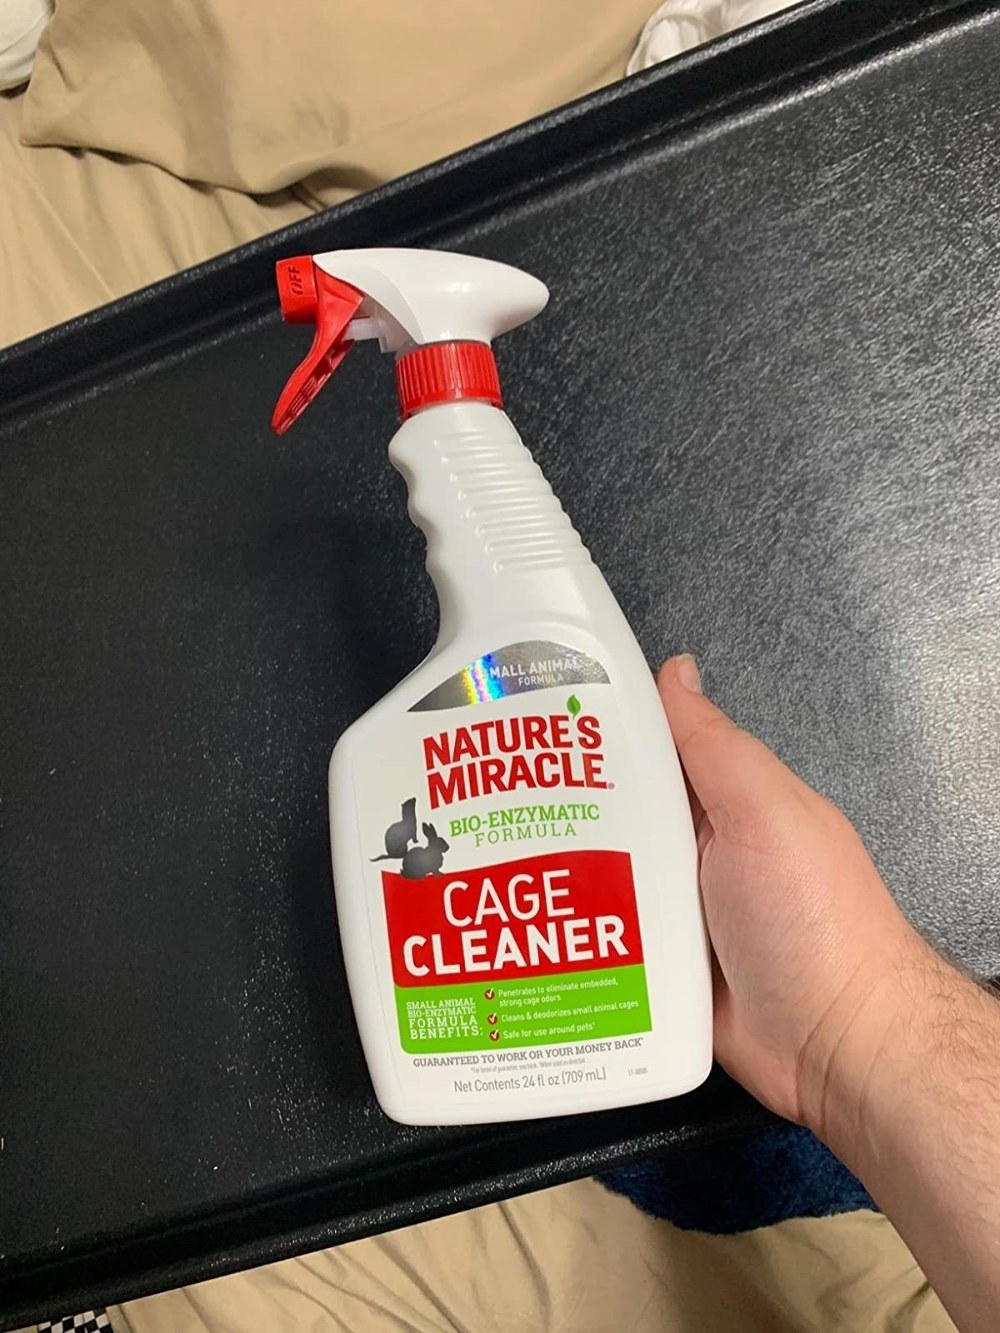 Review photo of the cage cleaner bottle